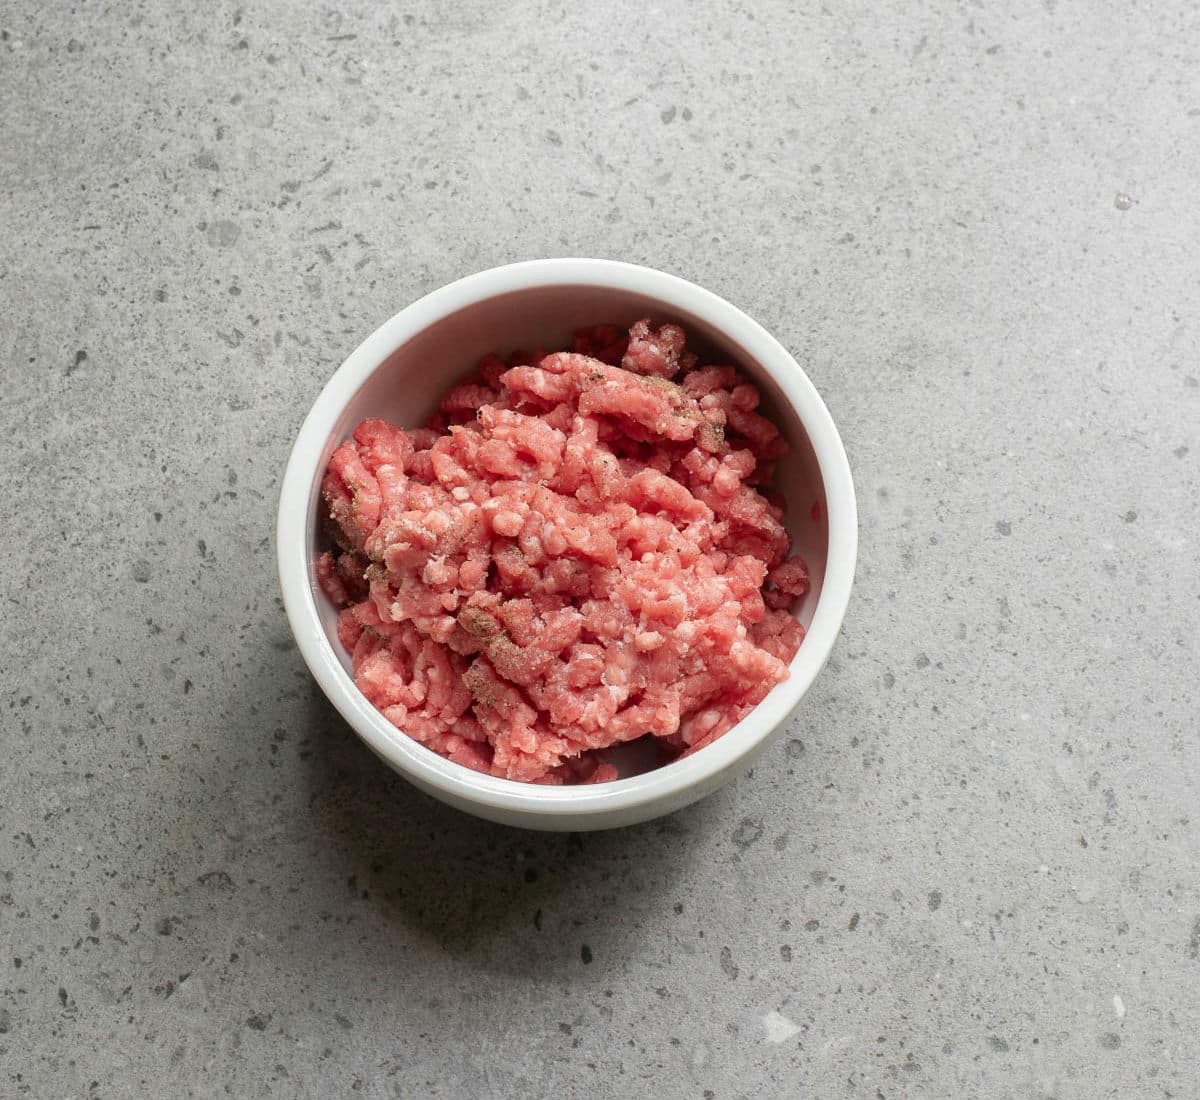 Ground beef in a white bowl on a gray counter.